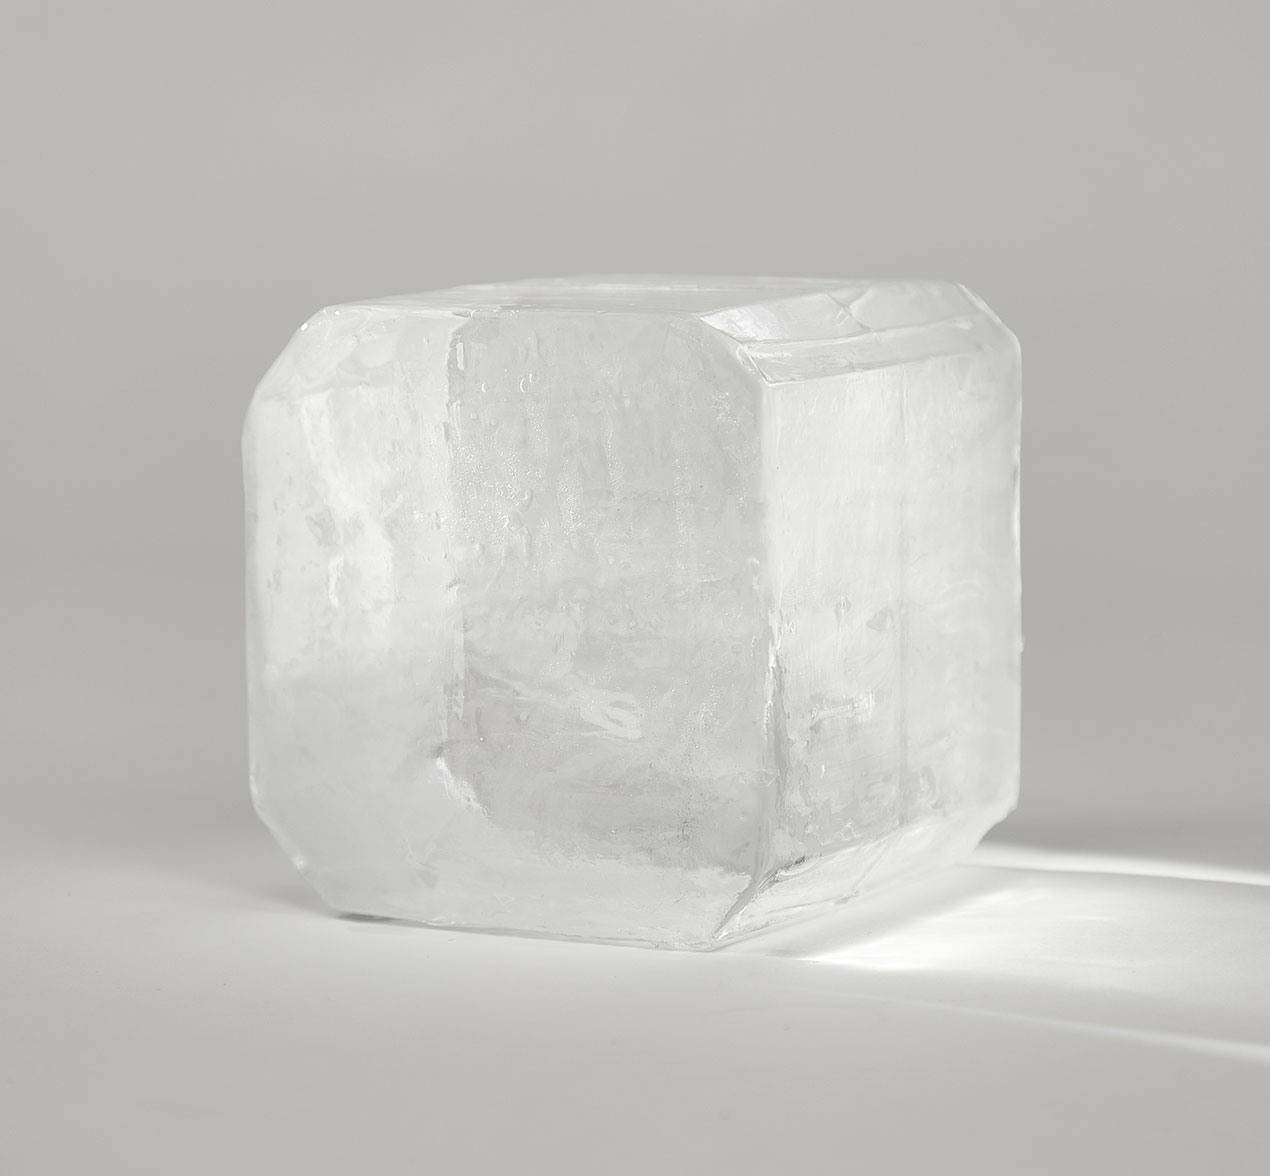 Crystal-Clear Ice Gem from Kentucky Straight Ice